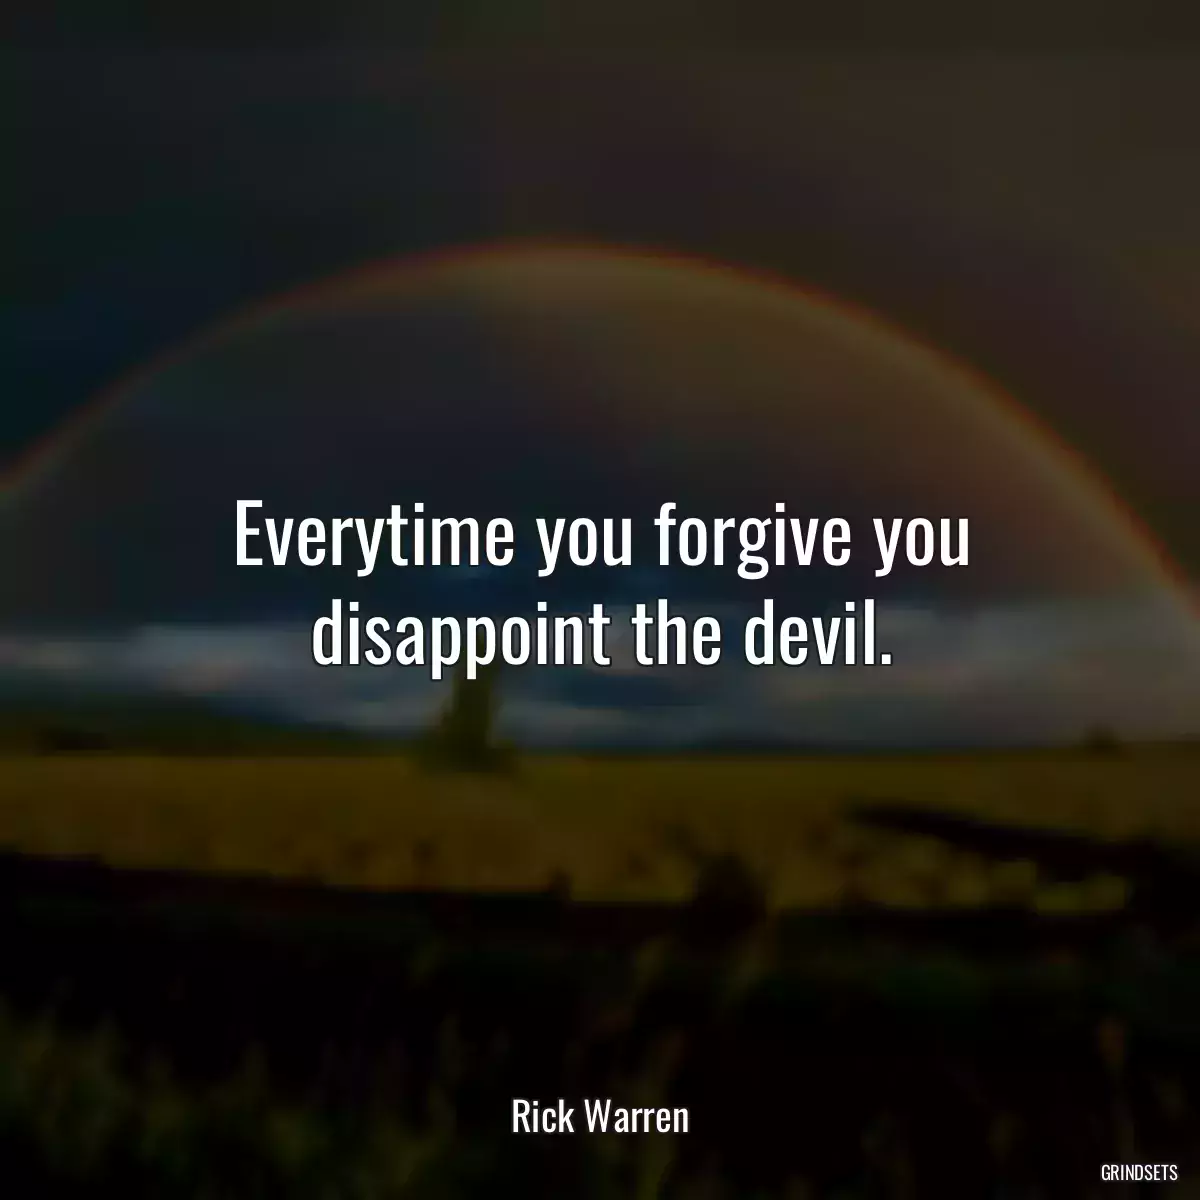 Everytime you forgive you disappoint the devil.